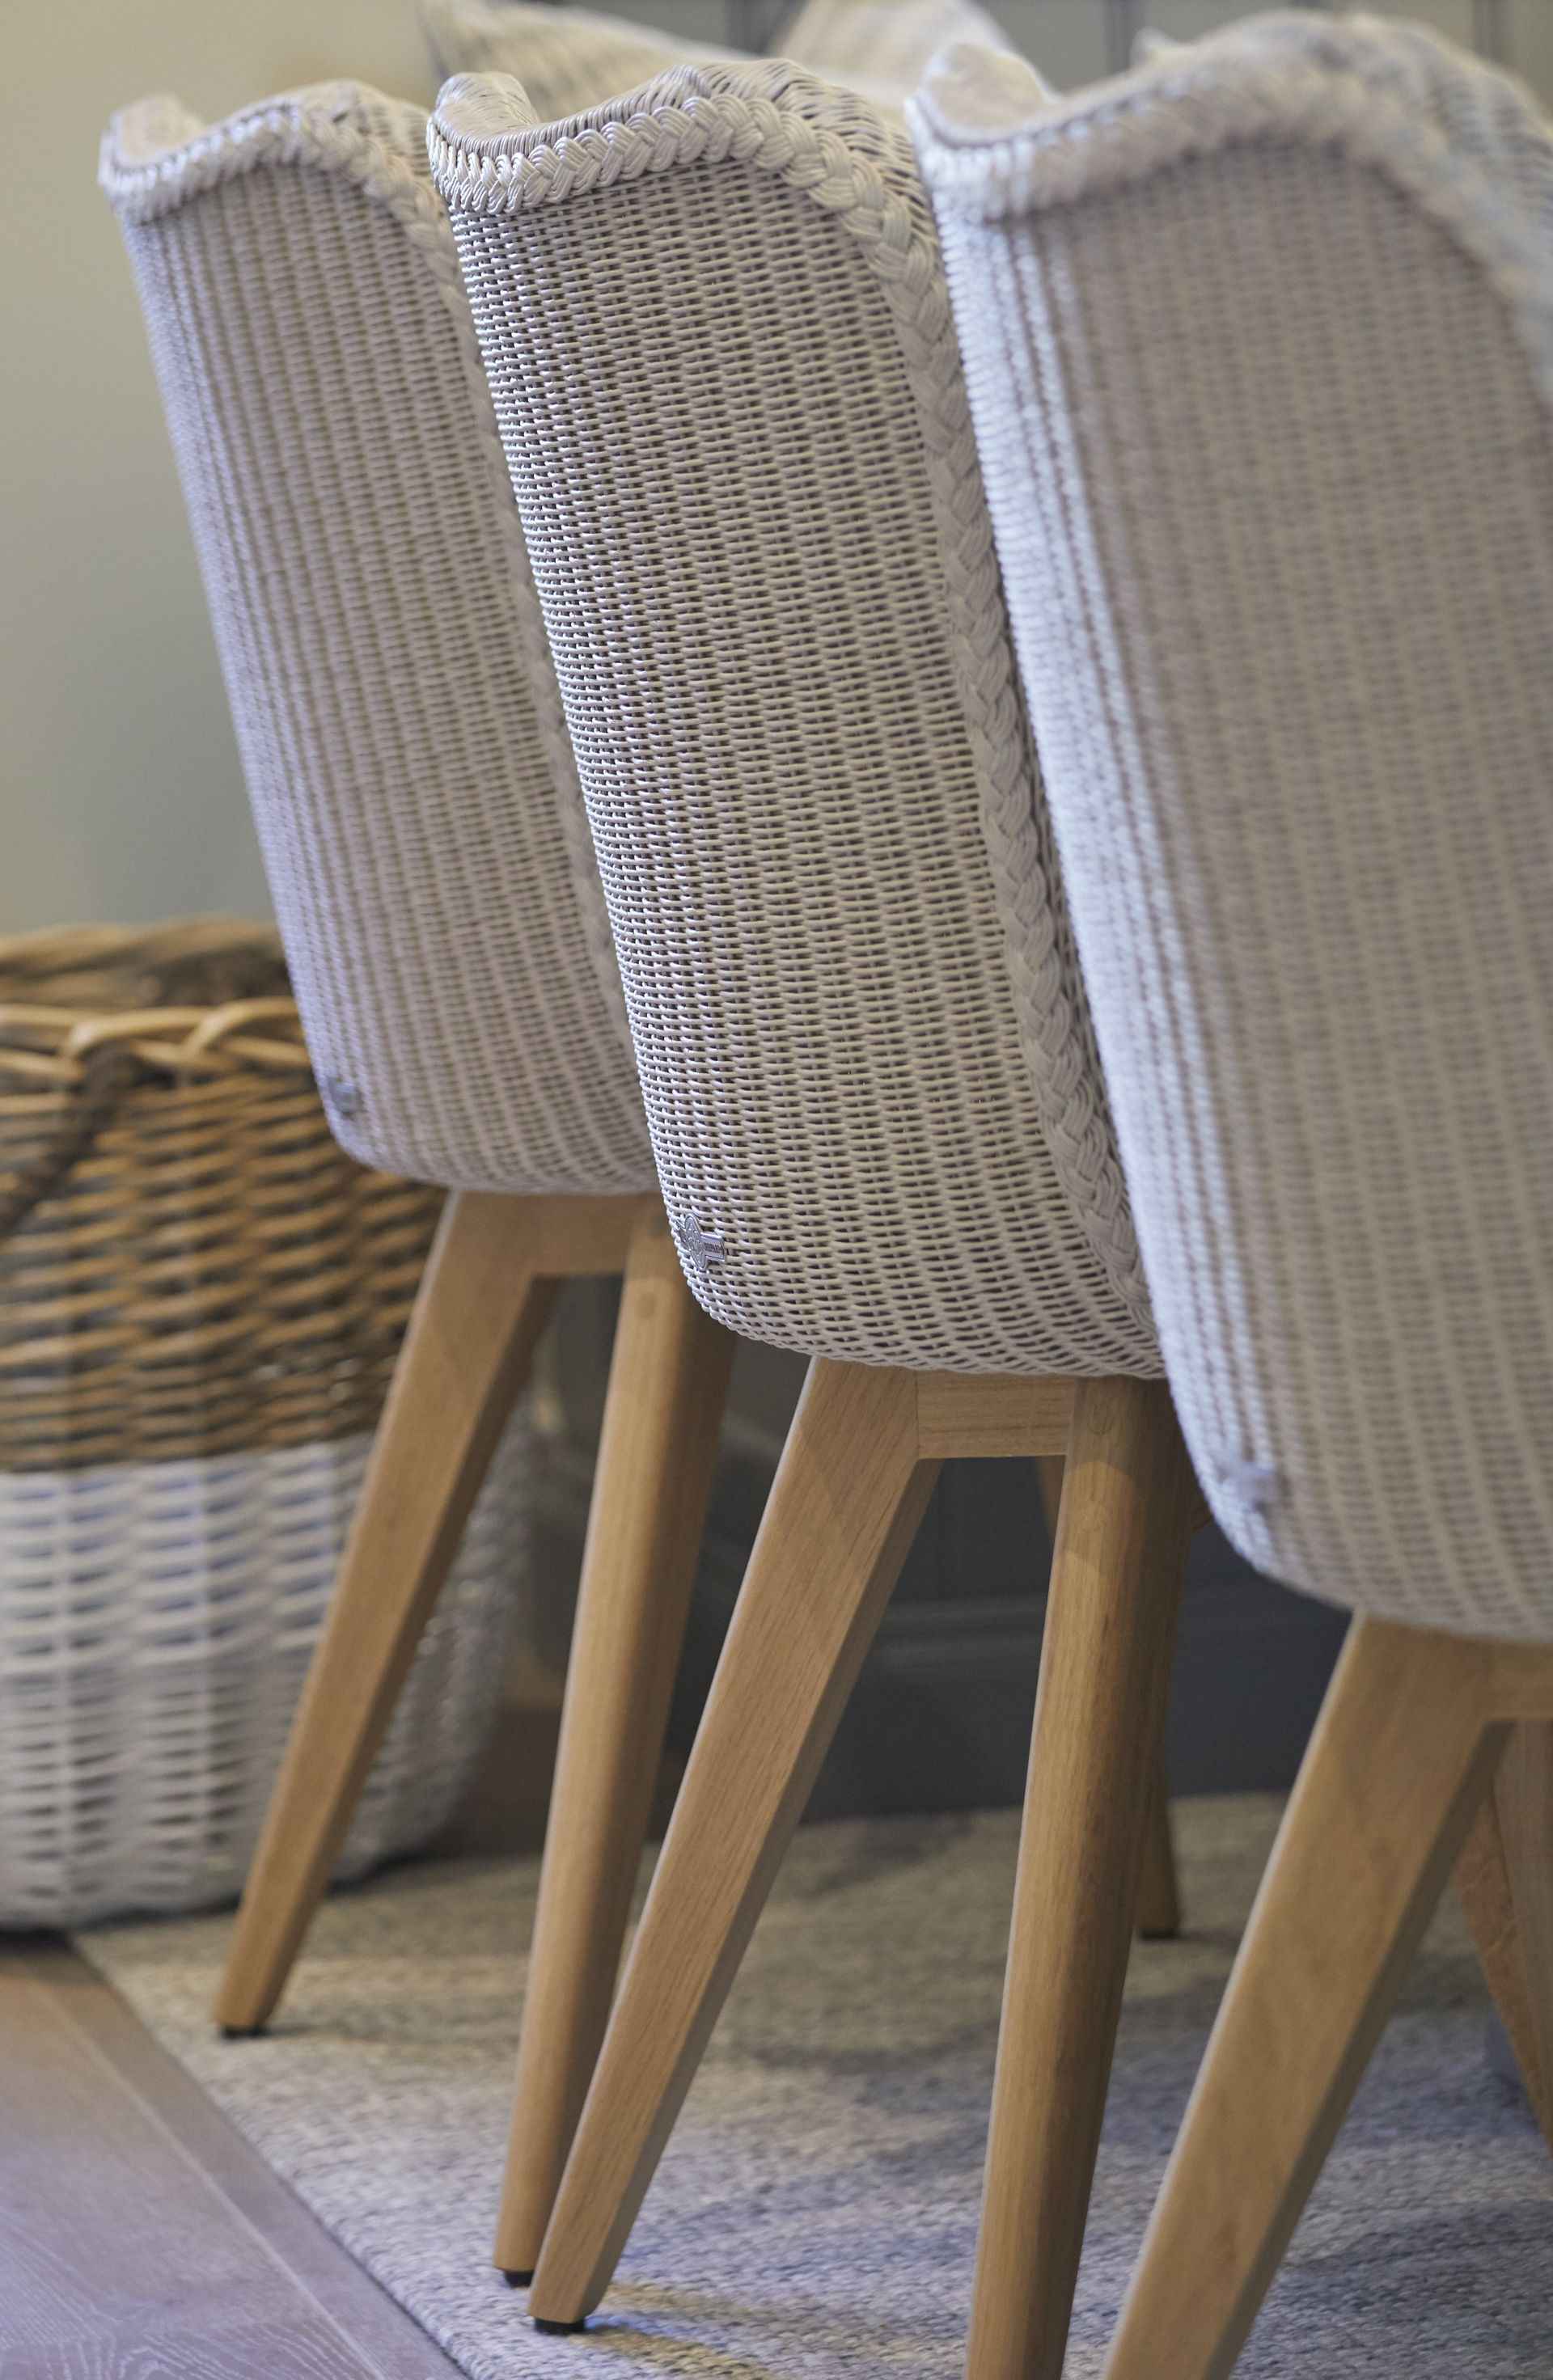 Close up of wicker chairs in Mountain Ash House